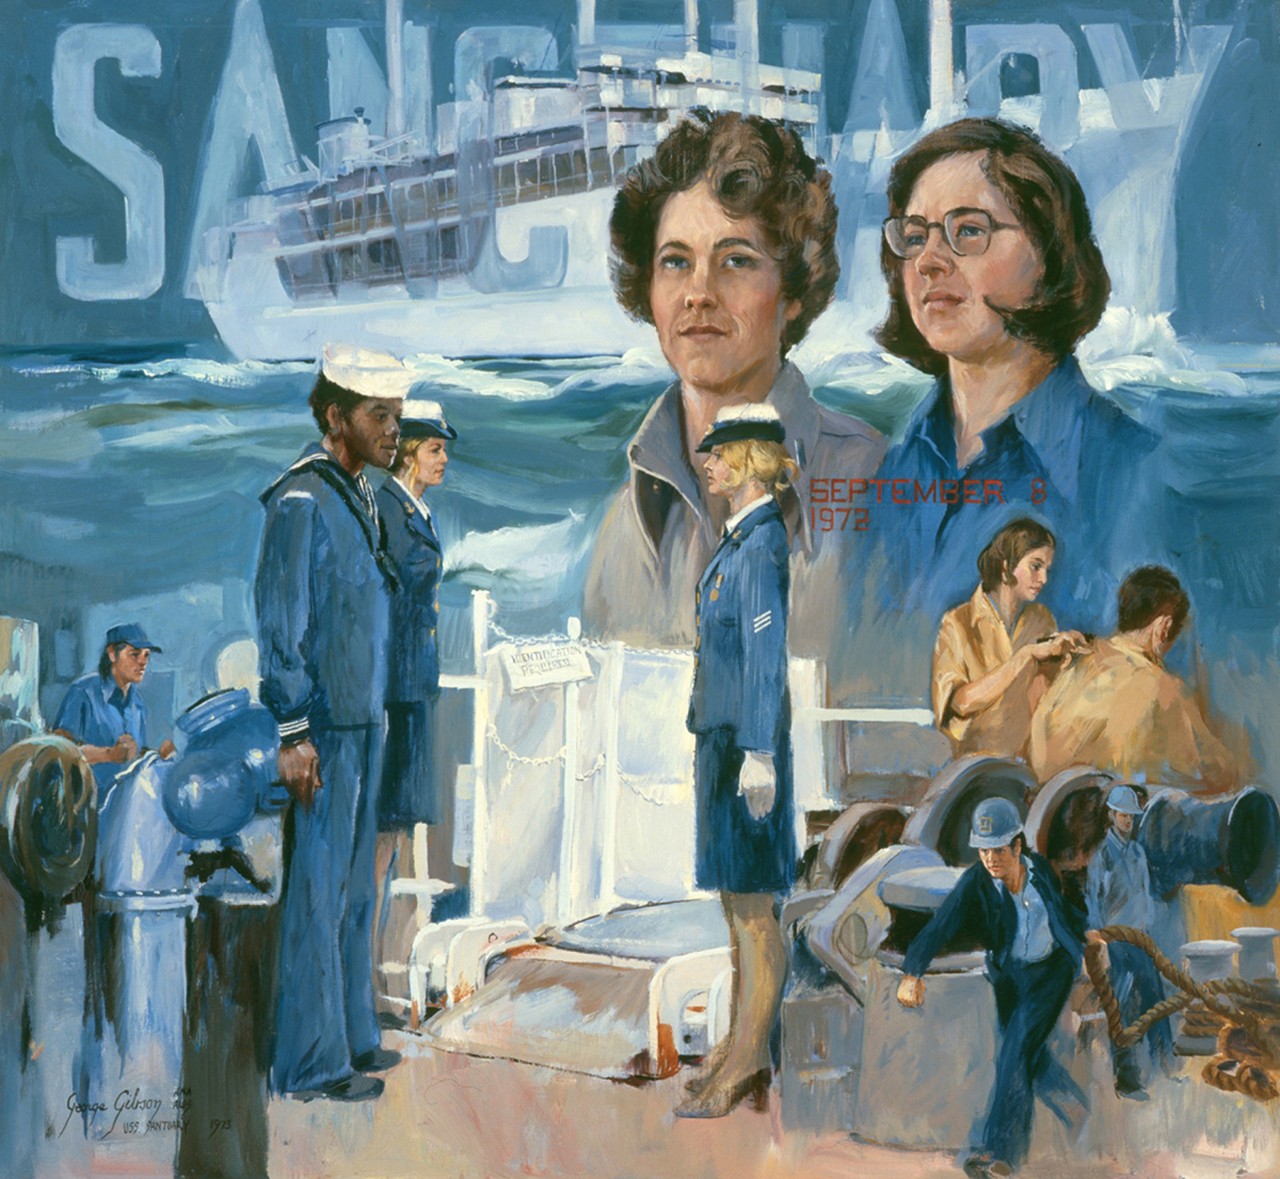 A montage of women and African Americans related to USS Sanctuary